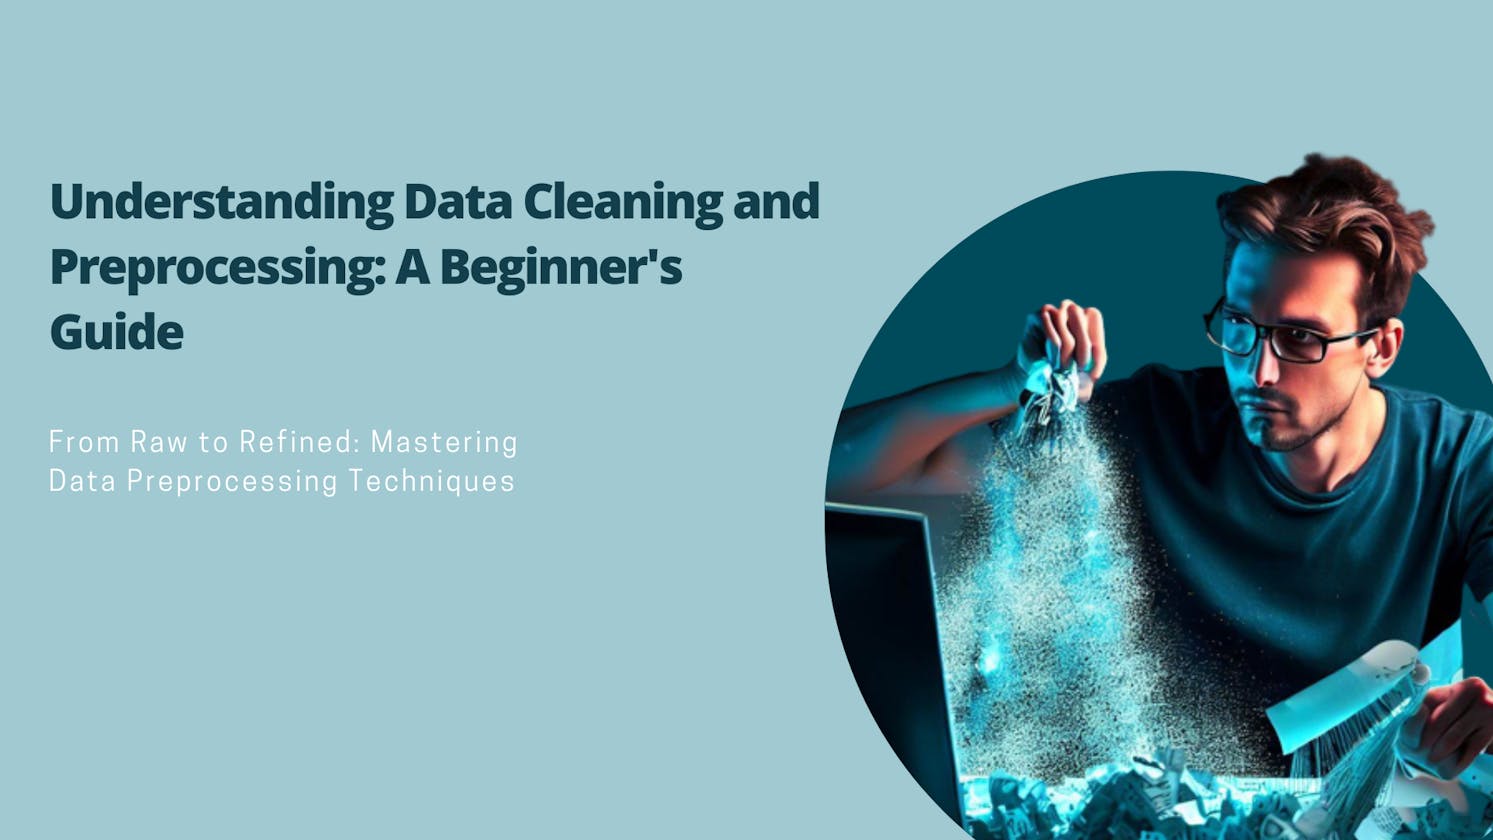 Understanding Data Cleaning and Preprocessing: A Beginner's Guide